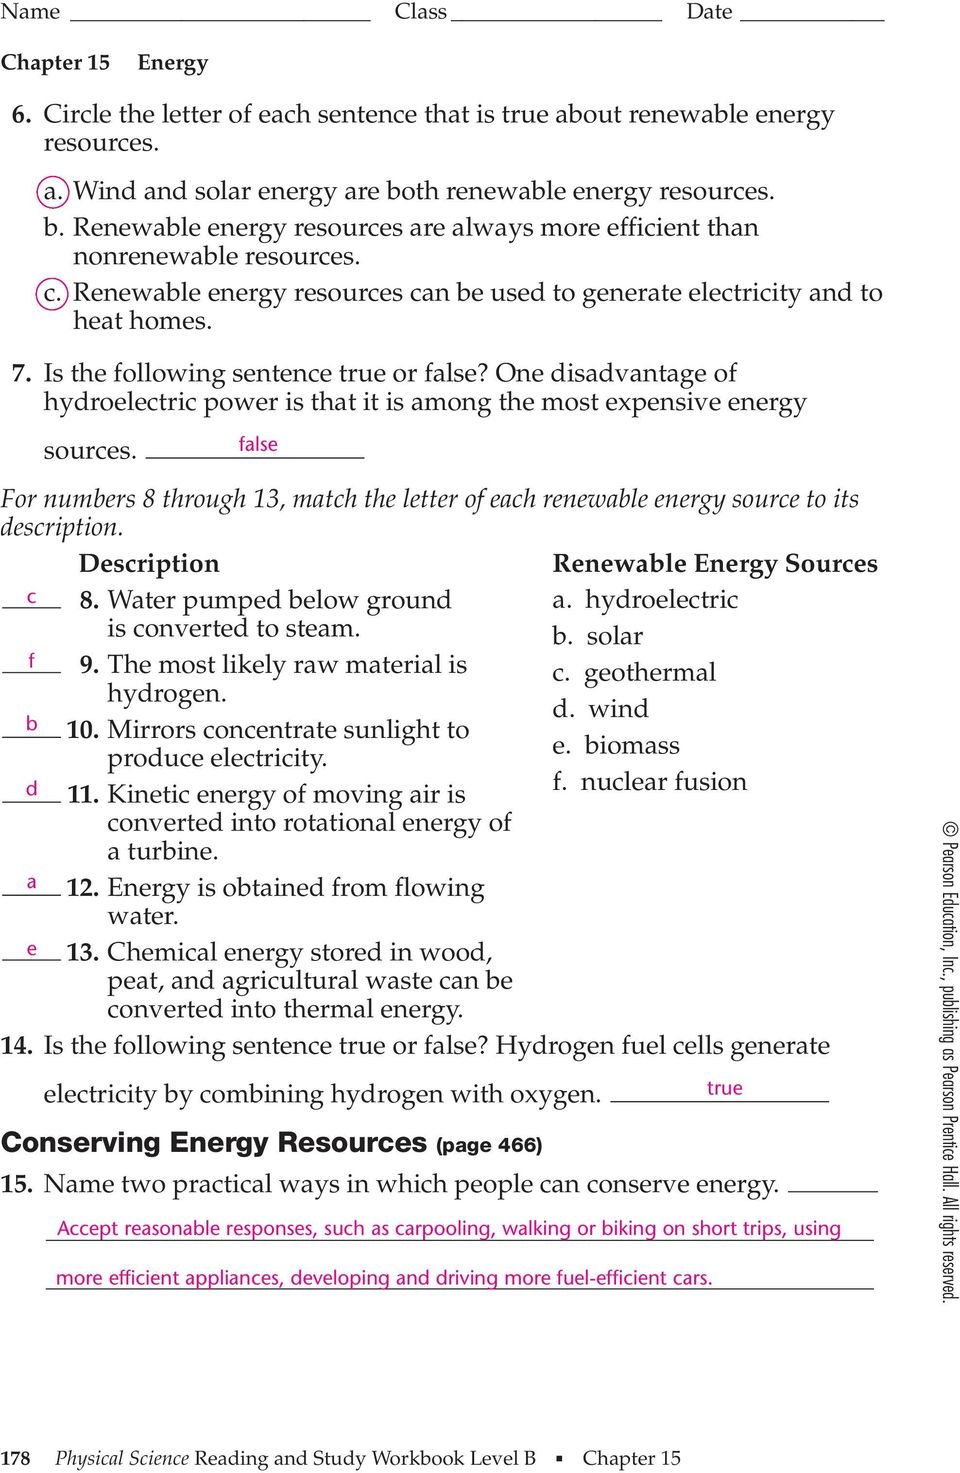 One disadvantage of hydroelectric power is that it is among the most expensive energy sources. For numbers 8 through 13, match the letter of each renewable energy source to its description.